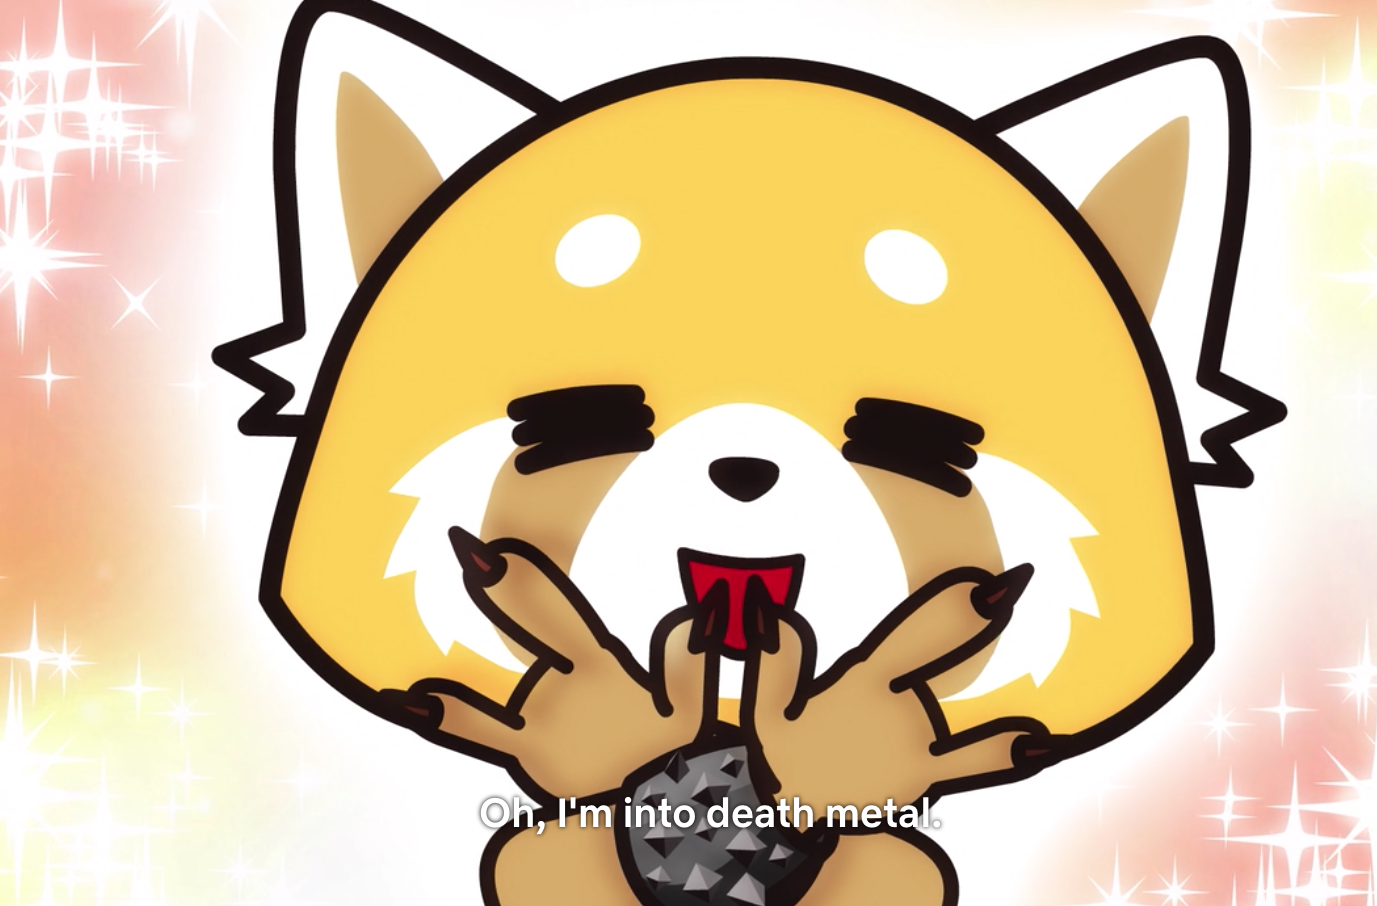 most metal moments in aggretsuko